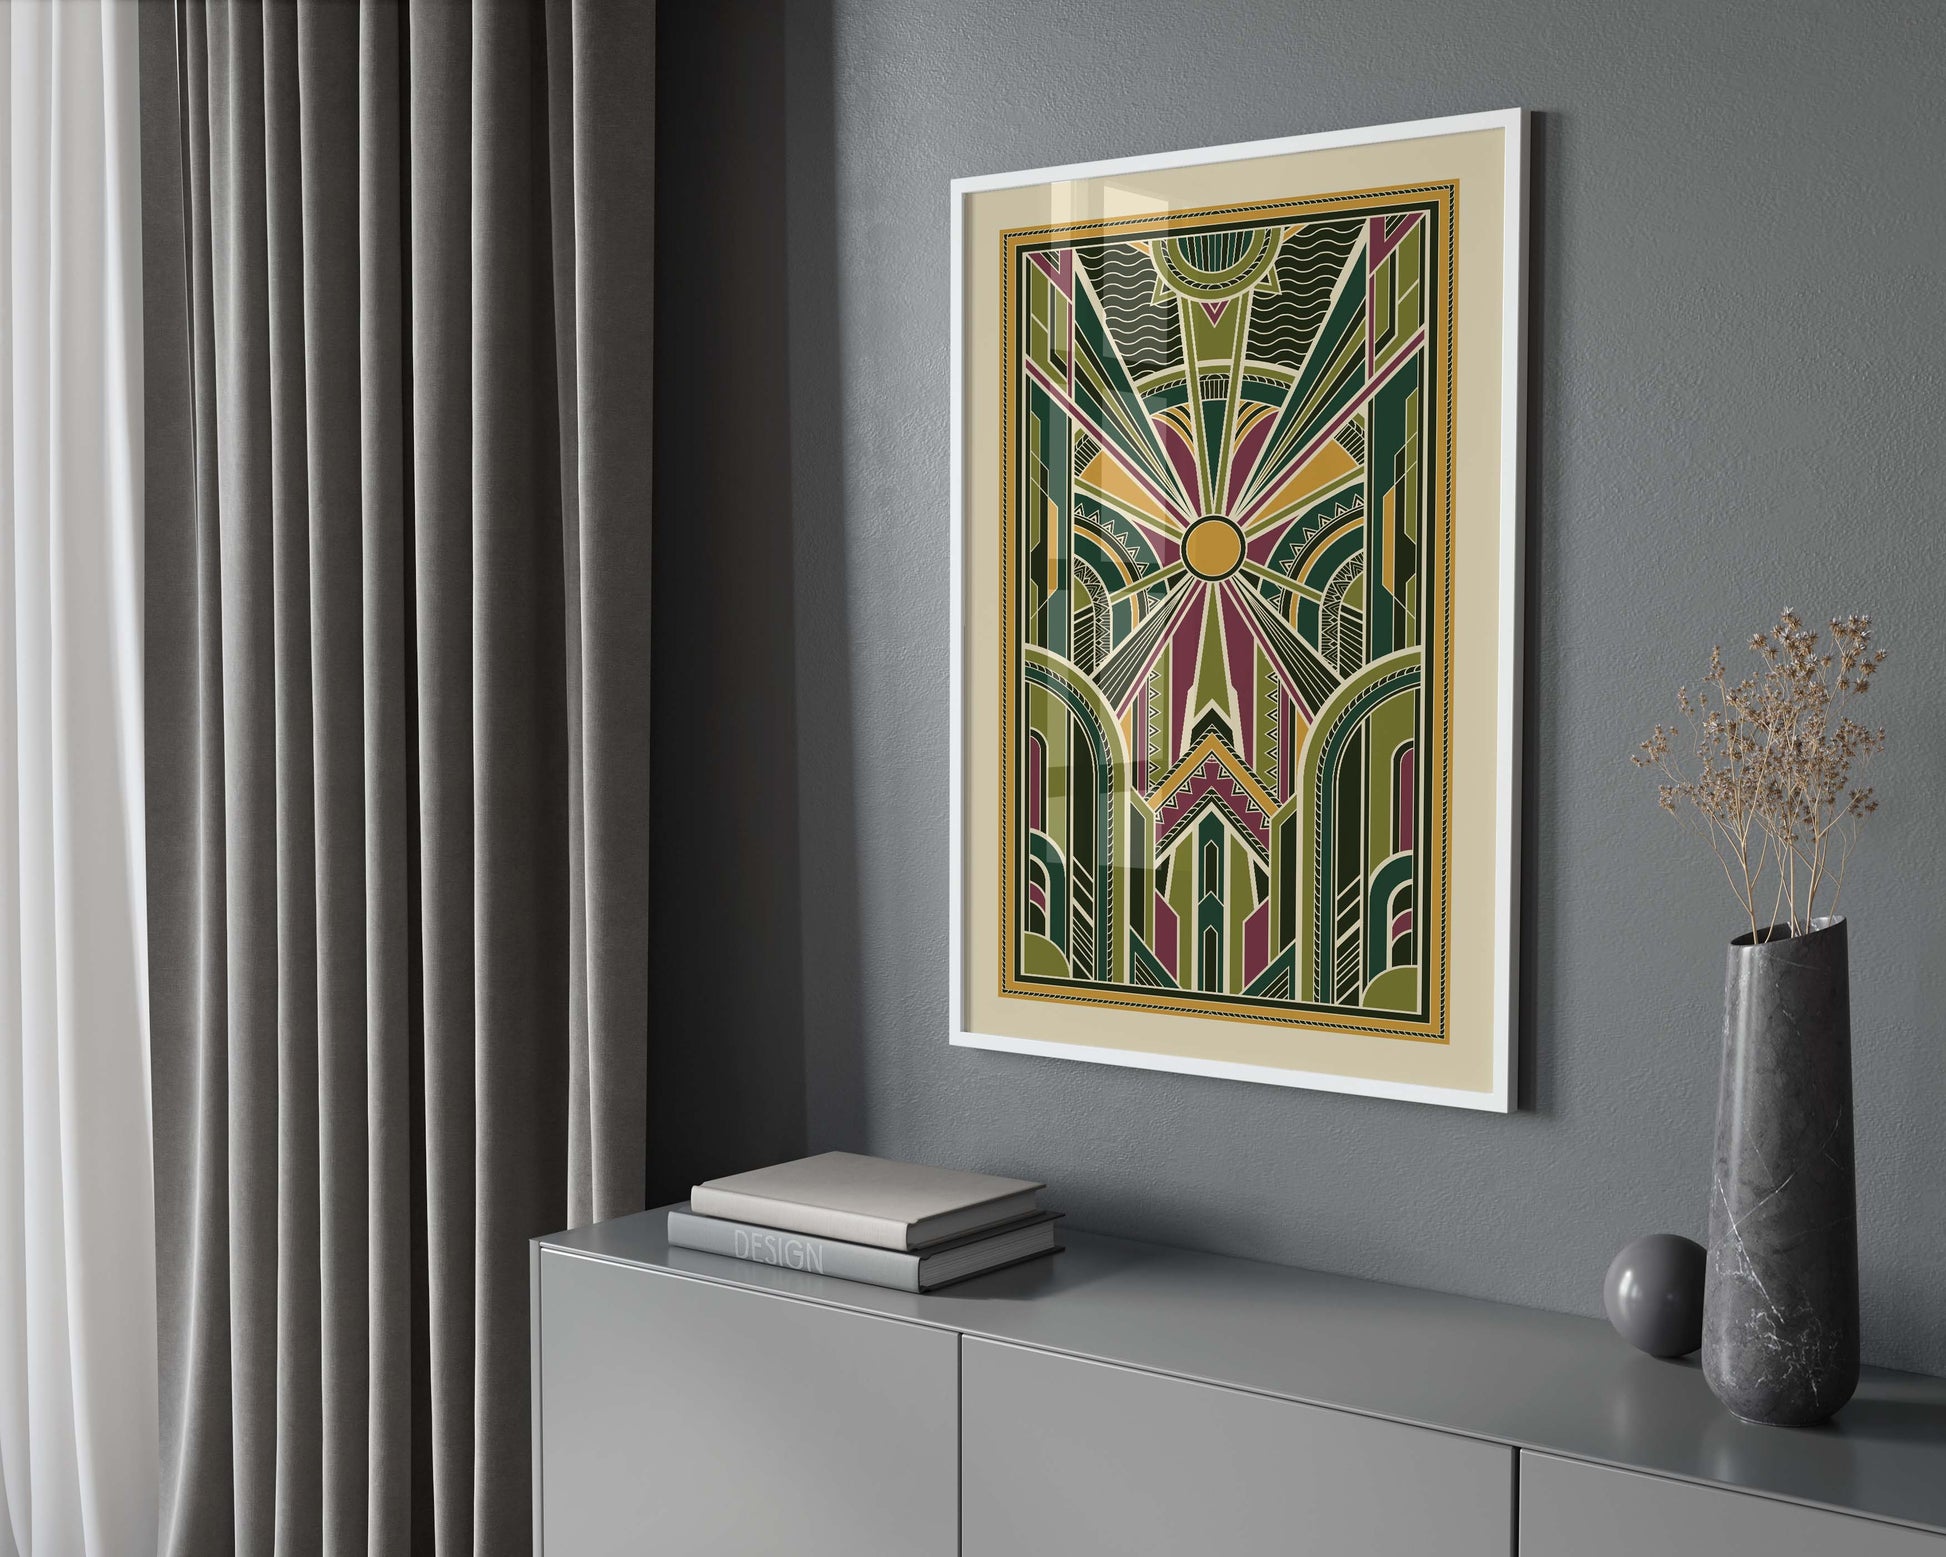 Art deco poster with a symmetrical pattern and rich green colour palette